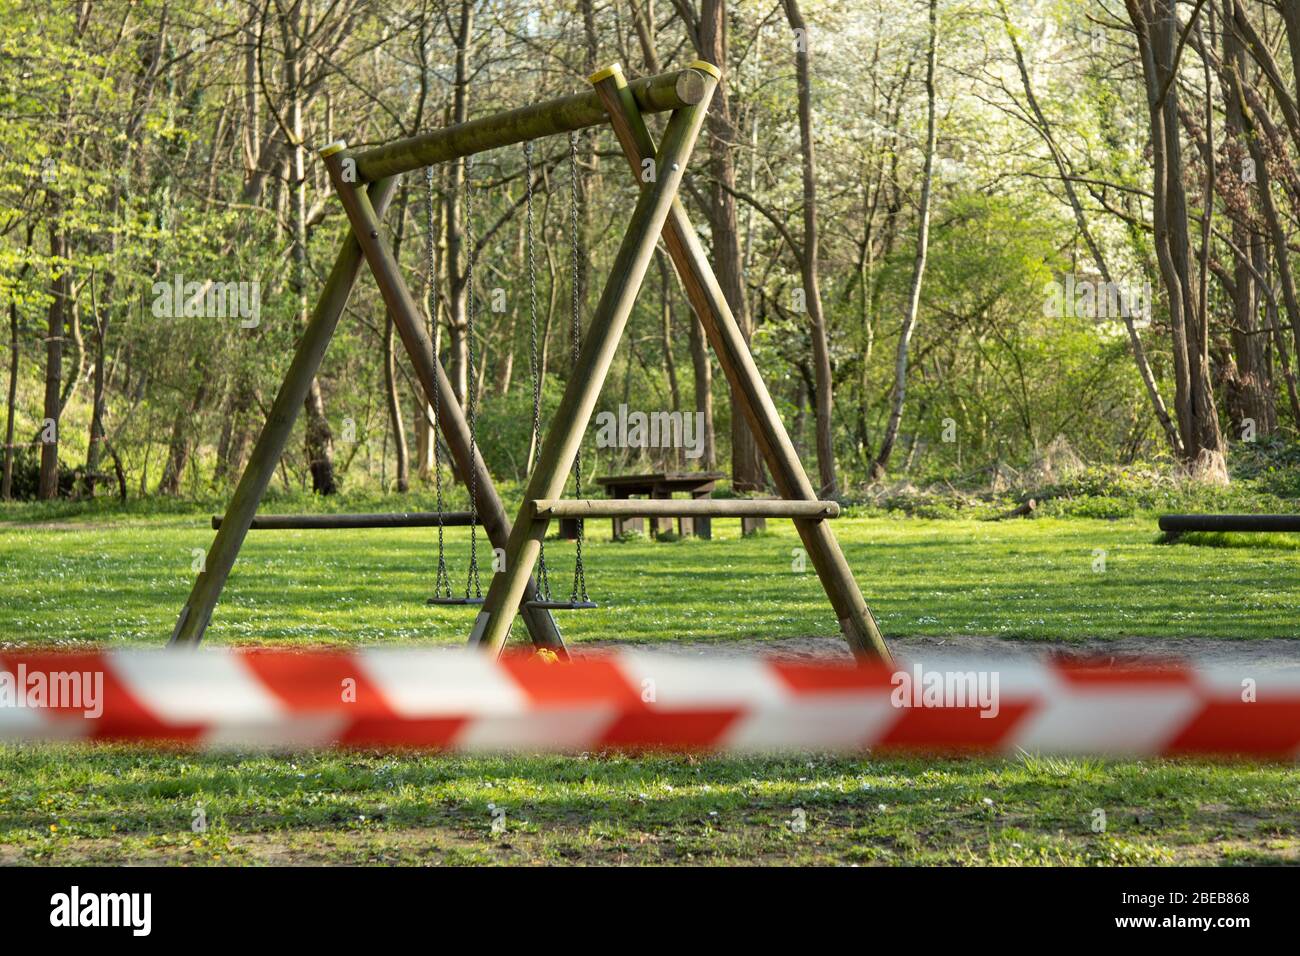 cordoned off playground with children's swing, surroundet by trees, forcus on background, blurred barrier tape Stock Photo